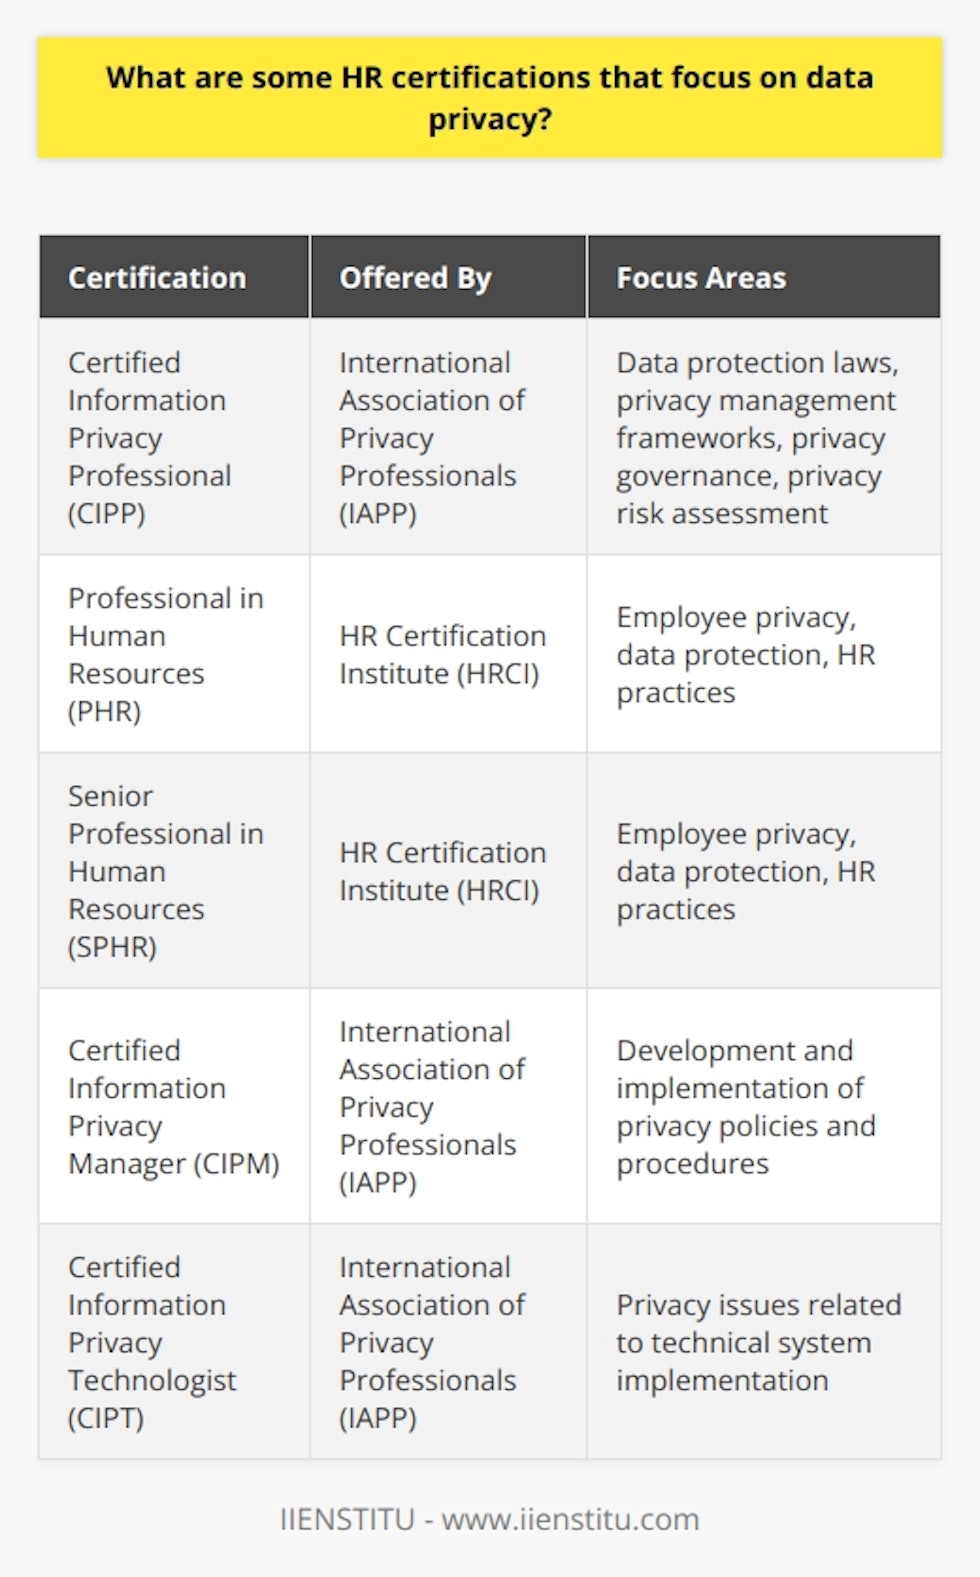 These certifications focus on the intersection of human resources and data privacy, providing professionals with the knowledge and skills necessary to effectively navigate privacy laws and regulations in the workplace.The Certified Information Privacy Professional (CIPP) certification is offered by the International Association of Privacy Professionals (IAPP). This certification program is designed to equip HR professionals with a comprehensive understanding of privacy laws and practices, enabling them to develop and implement effective privacy programs within their organizations. The CIPP certification covers key areas such as data protection laws, privacy management frameworks, privacy governance, and privacy risk assessment.The HR Certification Institute (HRCI) also offers certifications that touch upon data privacy. Their credentials, such as the Professional in Human Resources (PHR) and the Senior Professional in Human Resources (SPHR), cover various HR domains including employee privacy and data protection. These certifications provide HR professionals with a broader understanding of HR practices, including the legal and ethical considerations related to employee data privacy.The International Association of Privacy Professionals (IAPP), in addition to the CIPP certification, also offers the Certified Information Privacy Manager (CIPM) and the Certified Information Privacy Technologist (CIPT) certifications. The CIPM certification is targeted at privacy program managers and focuses on the development and implementation of privacy policies and procedures. The CIPT certification, on the other hand, is geared towards IT and technology professionals who need to understand privacy issues related to the implementation of technical systems.These certifications are valuable for HR professionals who want to specialize in data privacy within their organizations. By obtaining these certifications, HR professionals can demonstrate their expertise in privacy laws and best practices, enabling them to effectively address privacy concerns, protect sensitive employee data, and ensure compliance with applicable regulations.In conclusion, HR certifications that focus on data privacy include the Certified Information Privacy Professional (CIPP), HR Certification Institute's (HRCI) credentials, and the International Association of Privacy Professionals (IAPP) offerings. These certifications equip HR professionals with the necessary knowledge and skills to navigate privacy laws and regulations, protect employee data, and ensure compliance within the workplace.